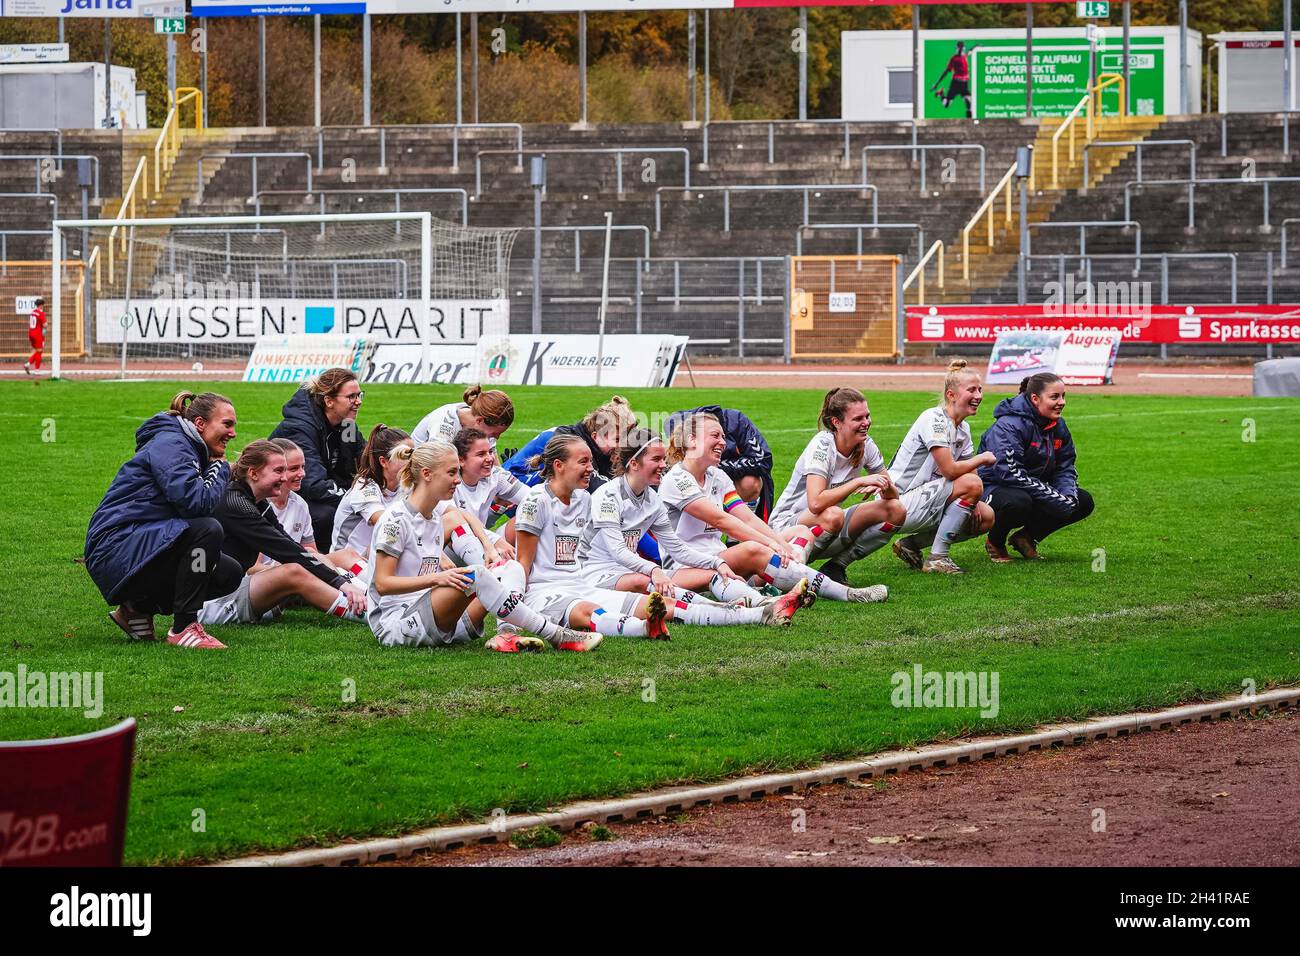 Siegen, Germany, October 31st 20 Players of SV Henstedt-Ulzburg the DFB-Pokal 2021/2022 third round match between Sportfreunde Siegen and SV Henstedt-Ulzburg at the Leimbachstadium in Siegen, Germany.  Norina Toenges/Sports Press Phot Stock Photo